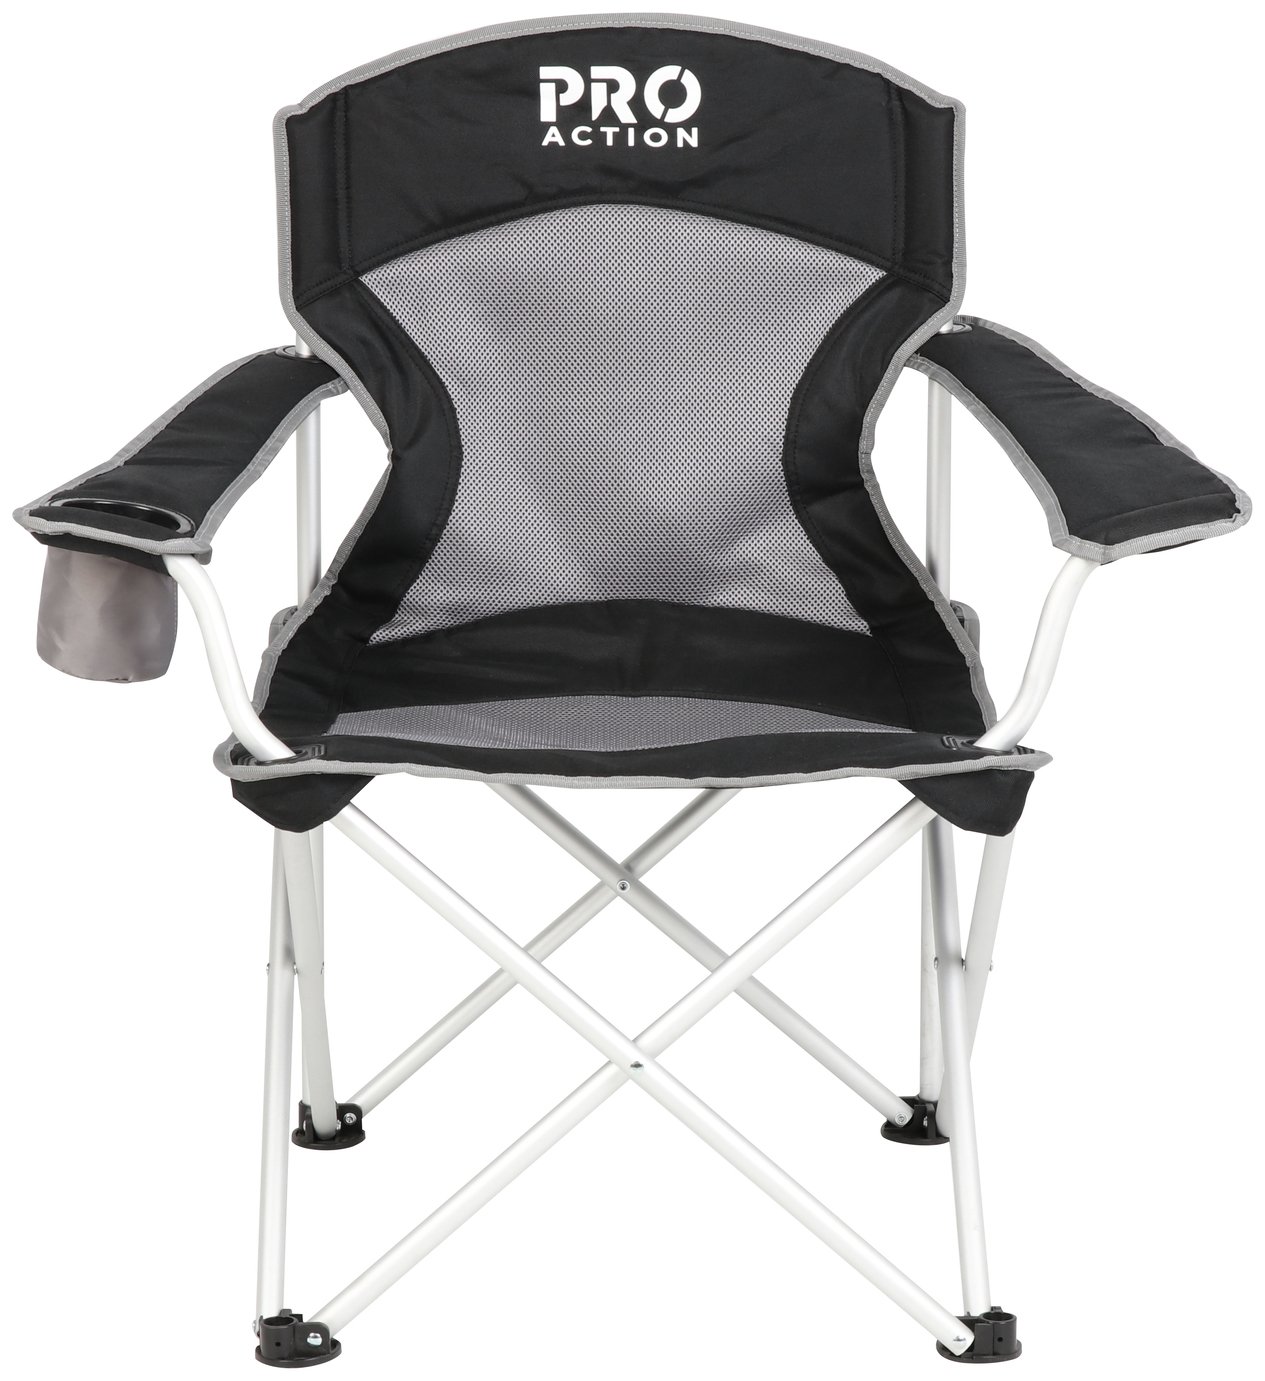 Pro Action Aluminium Deluxe Camping Chair